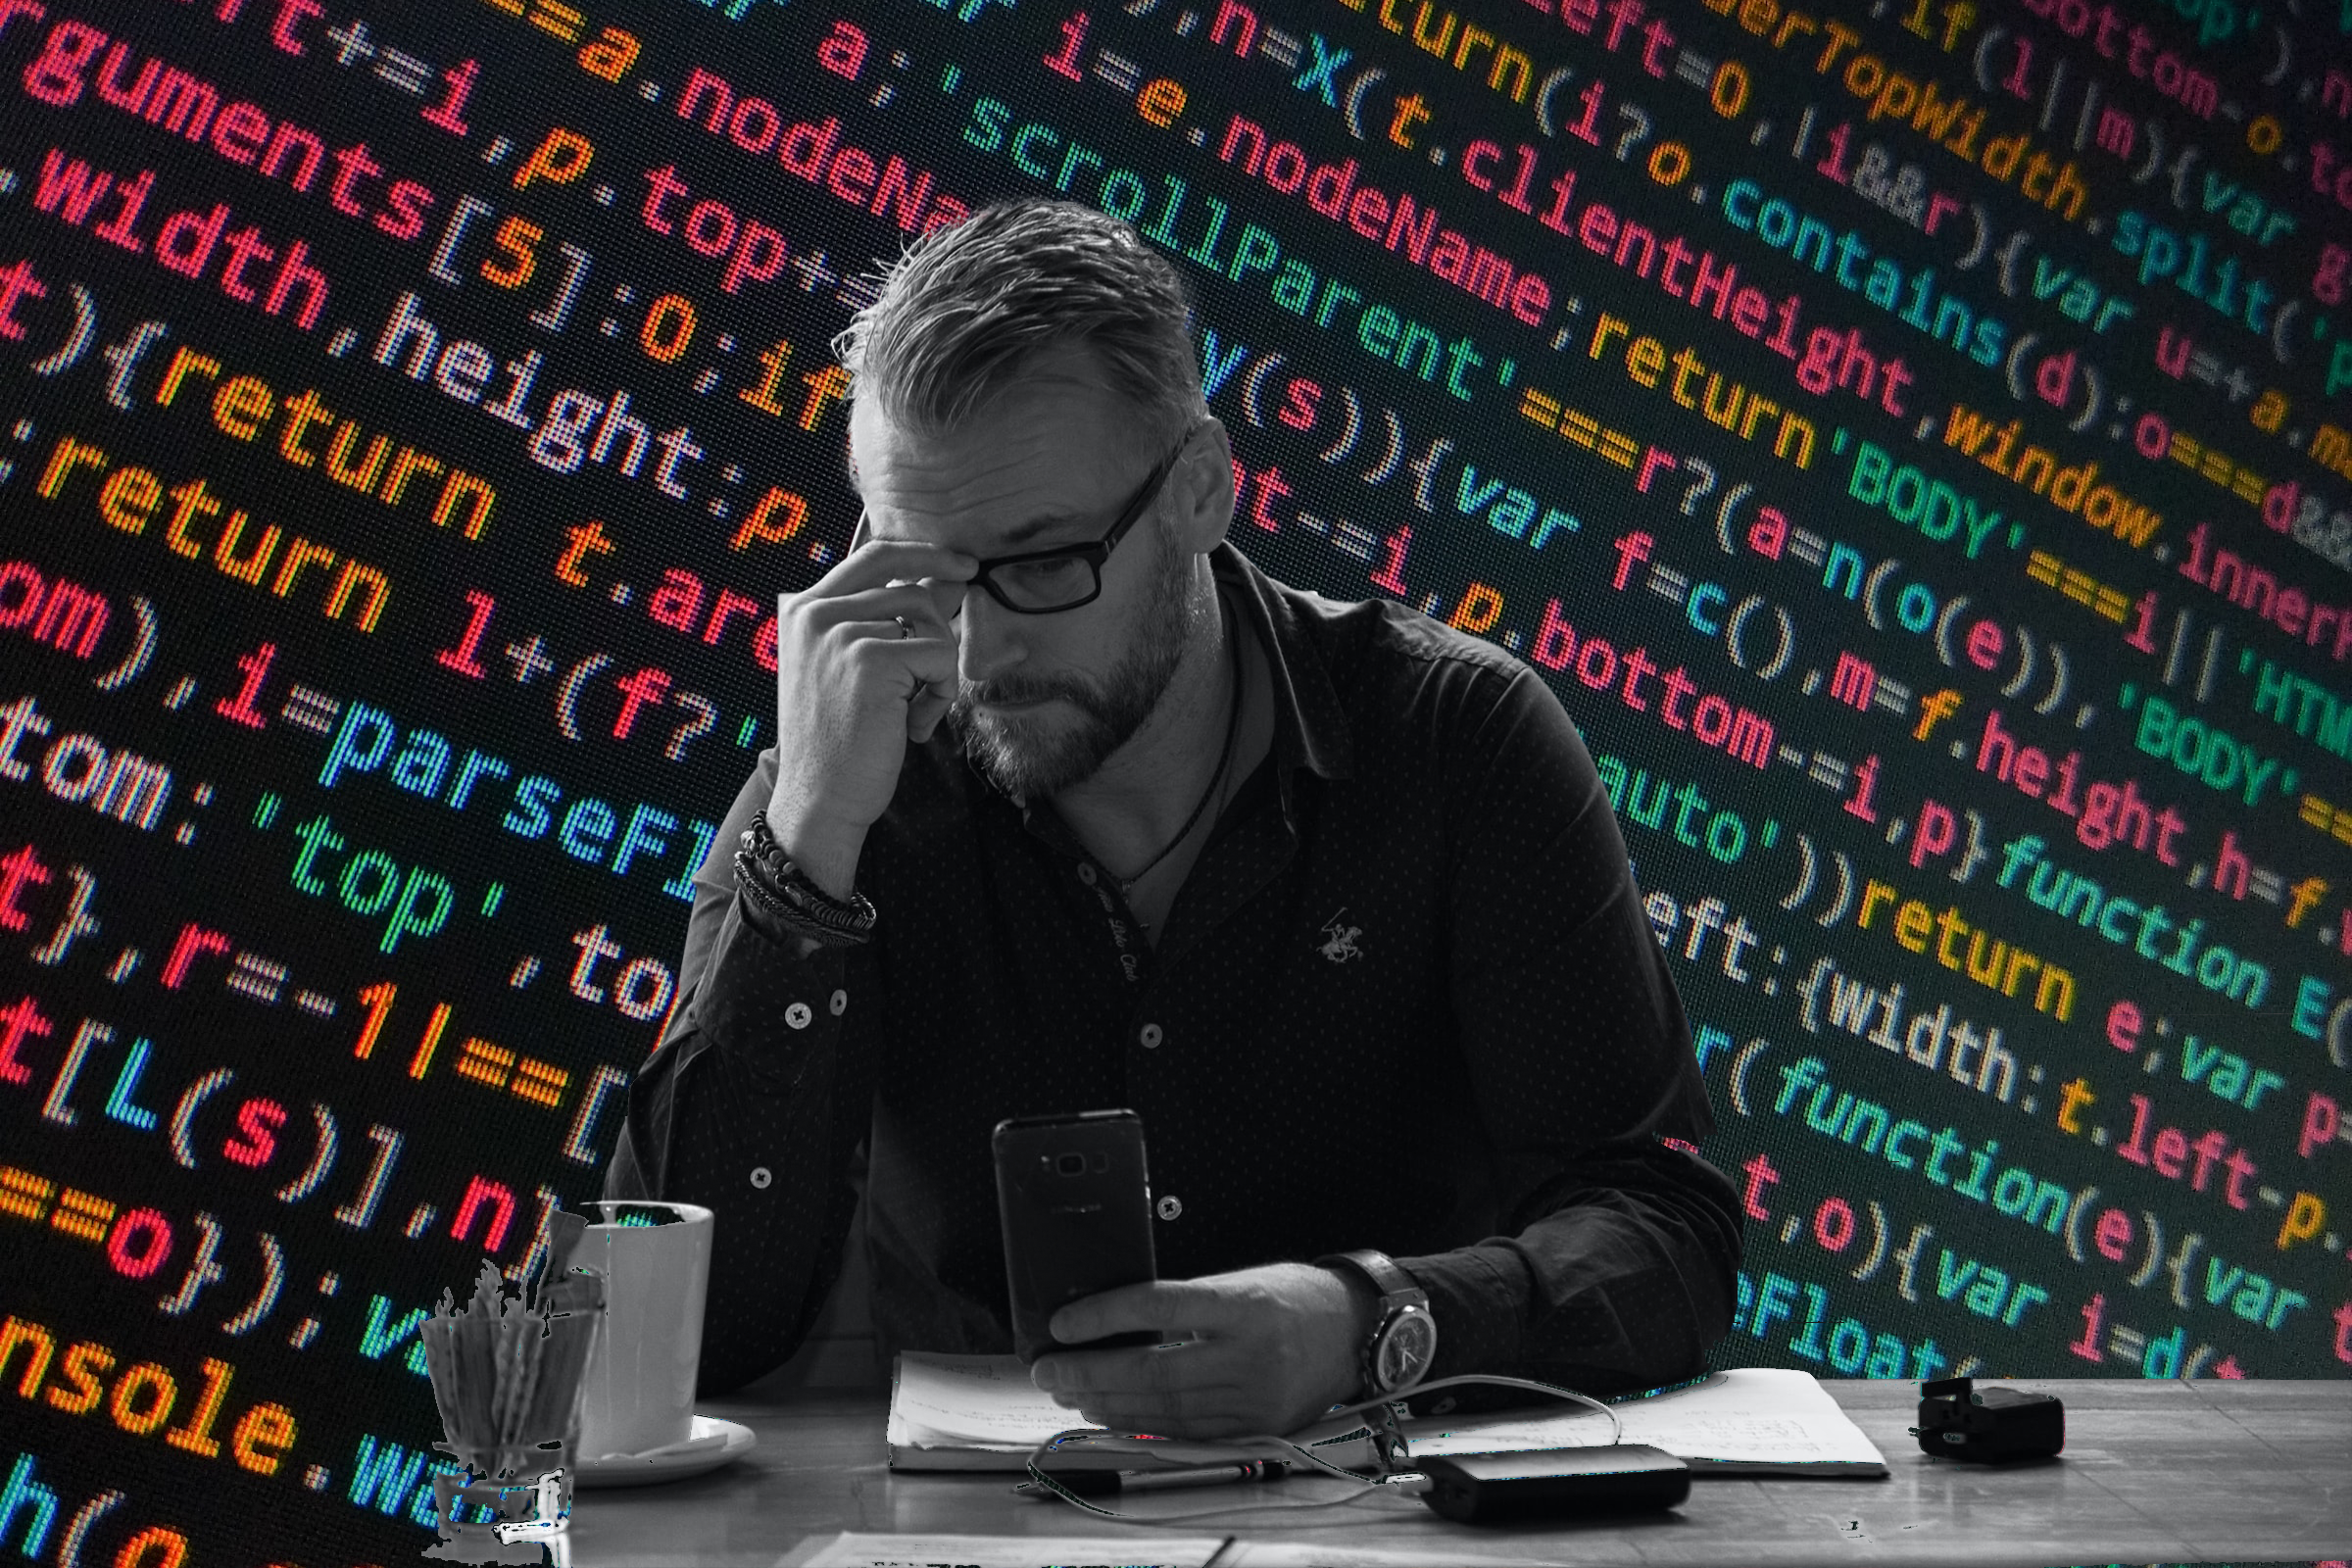 man at desk reviews information in front of a wall of multi-color code